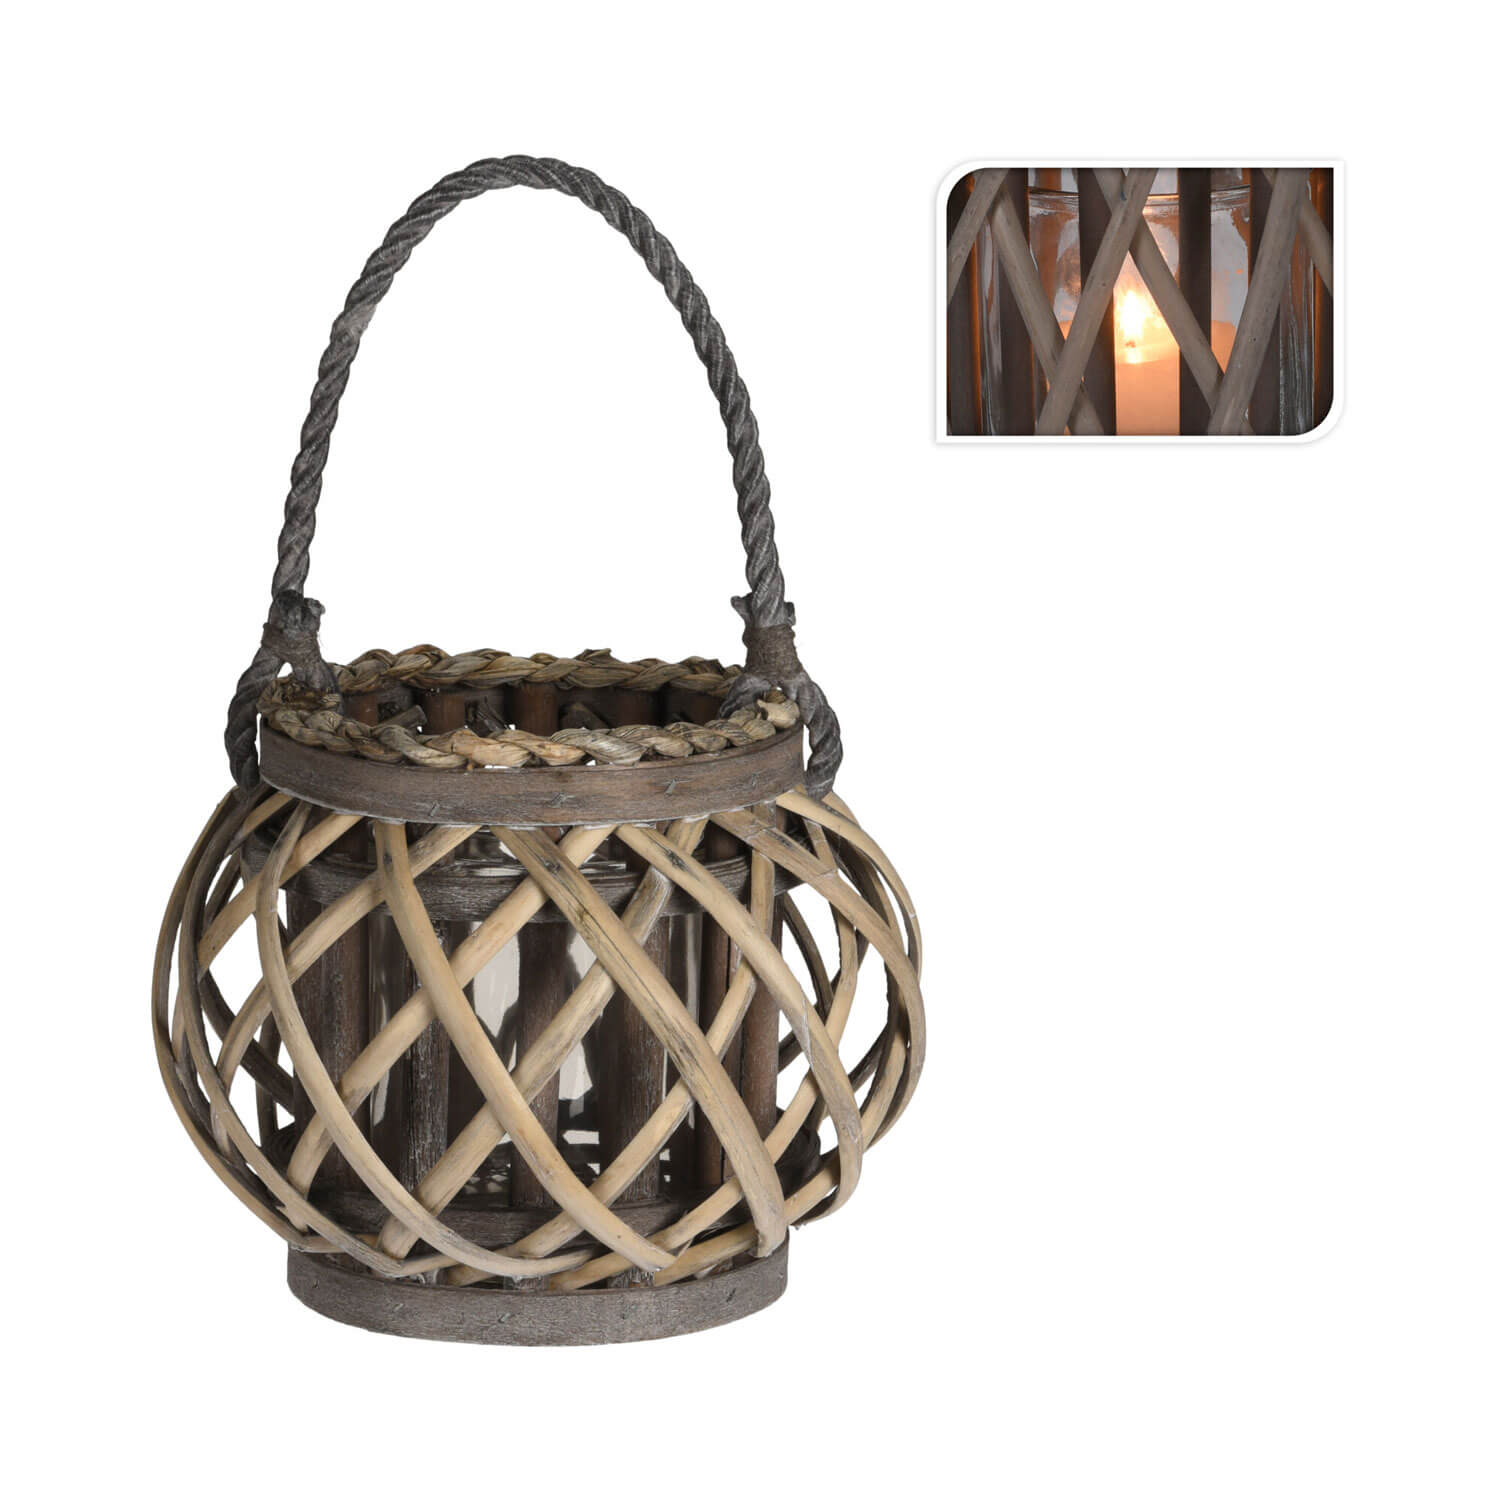 The Home Collection Willow Lantern 1 Shaws Department Stores